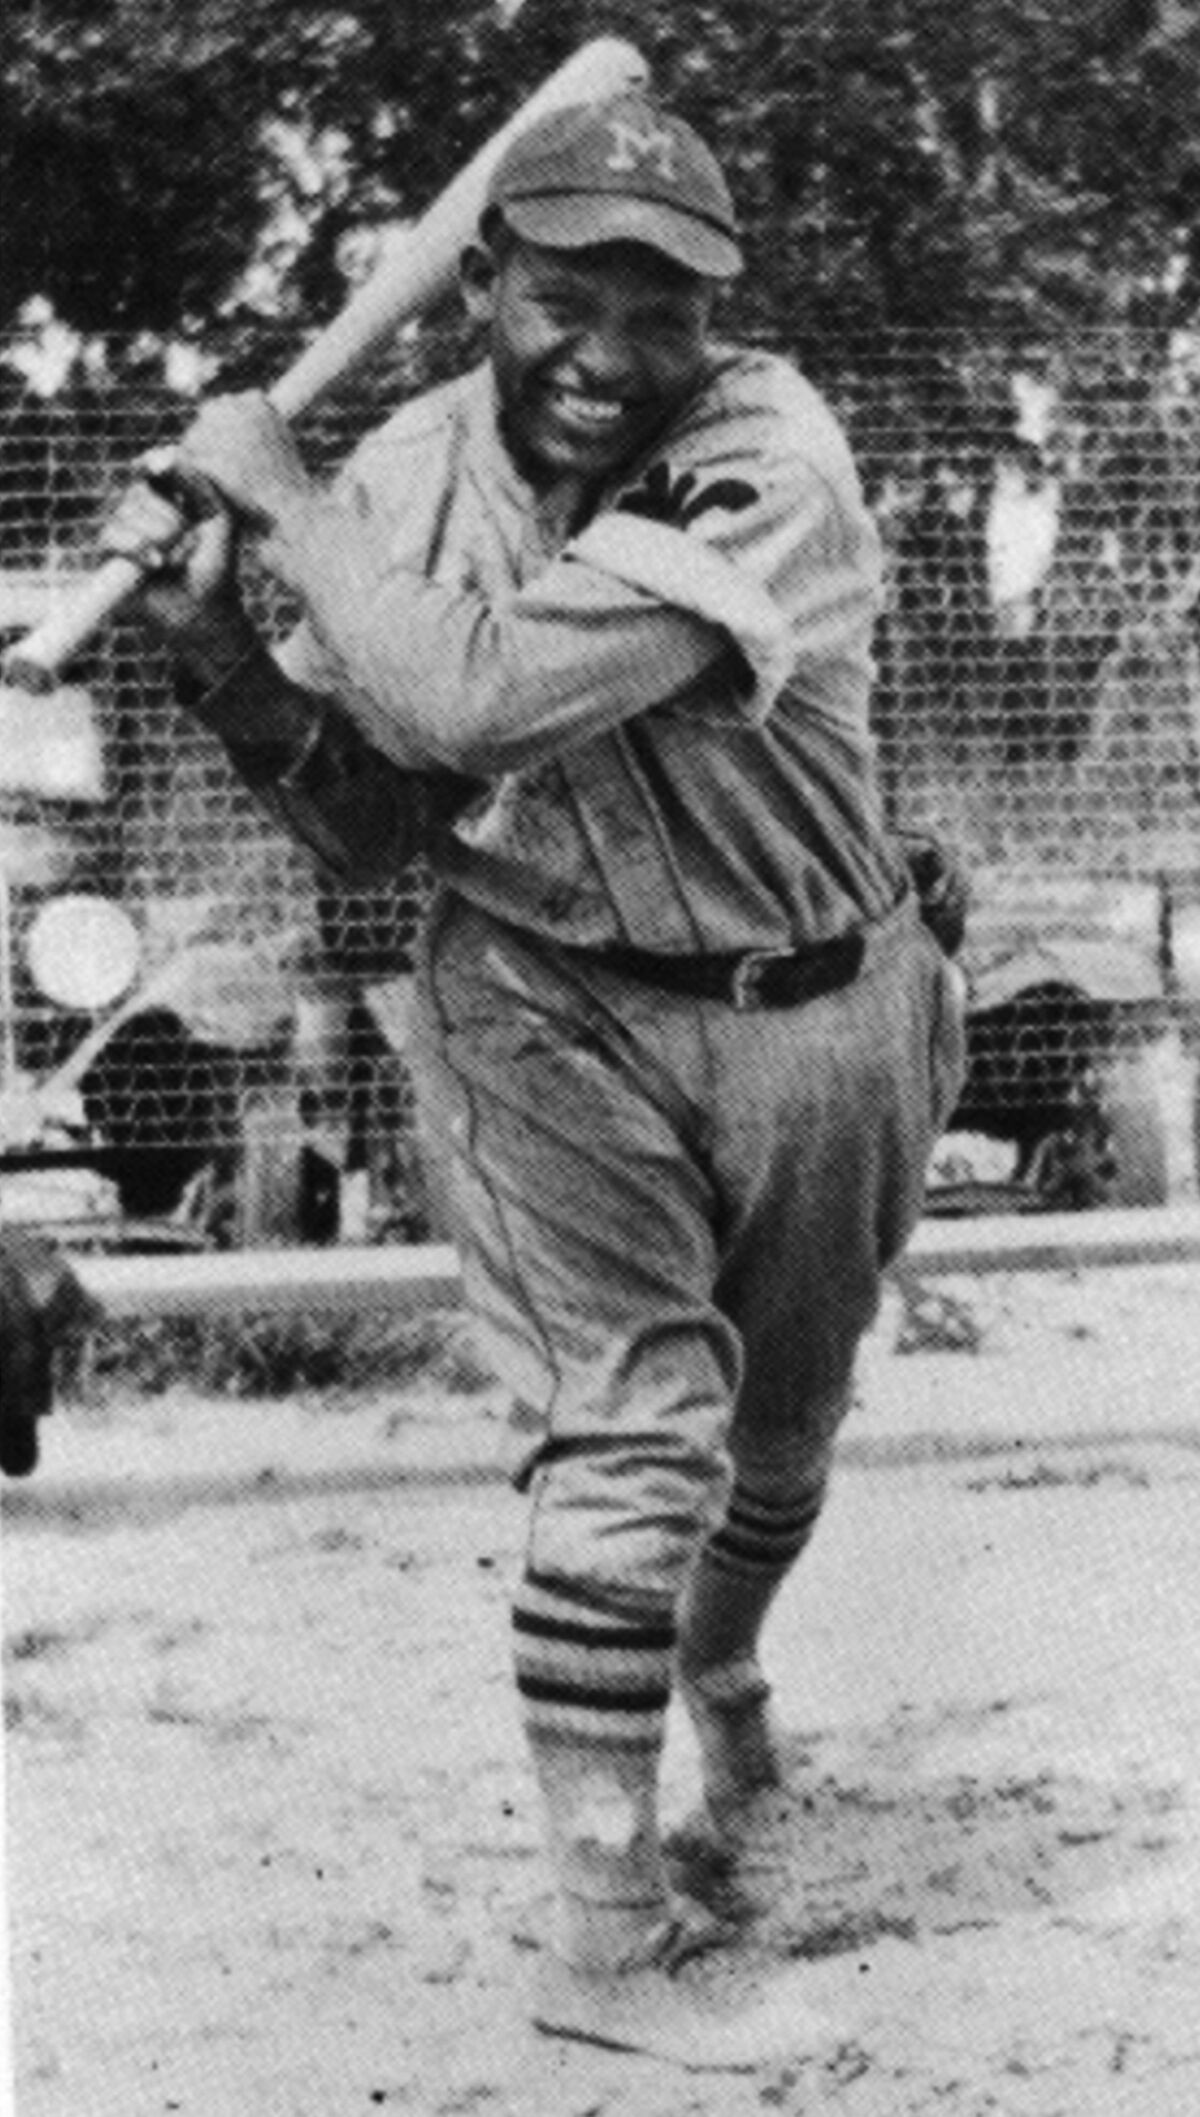 A. Hallie Harding, SS/2B/3B, is shown in the uniform of the Kansas City Monarchs. 